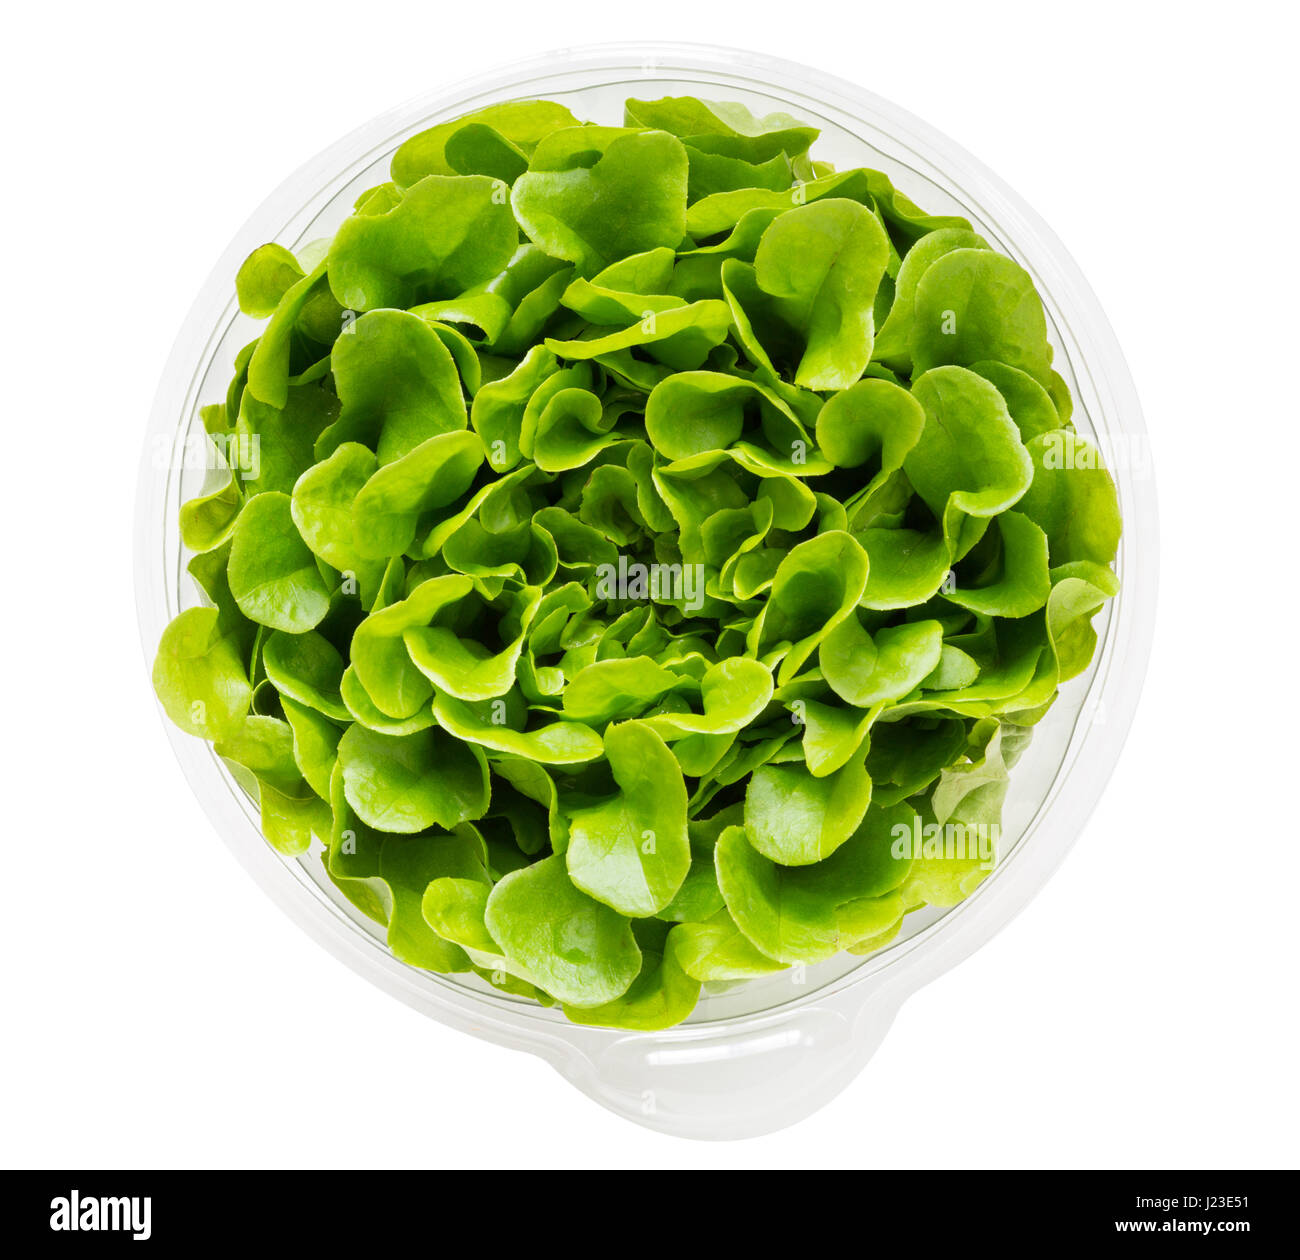 Salanova lettuce growing in plastic pot to allow individual leaves to be picked Stock Photo